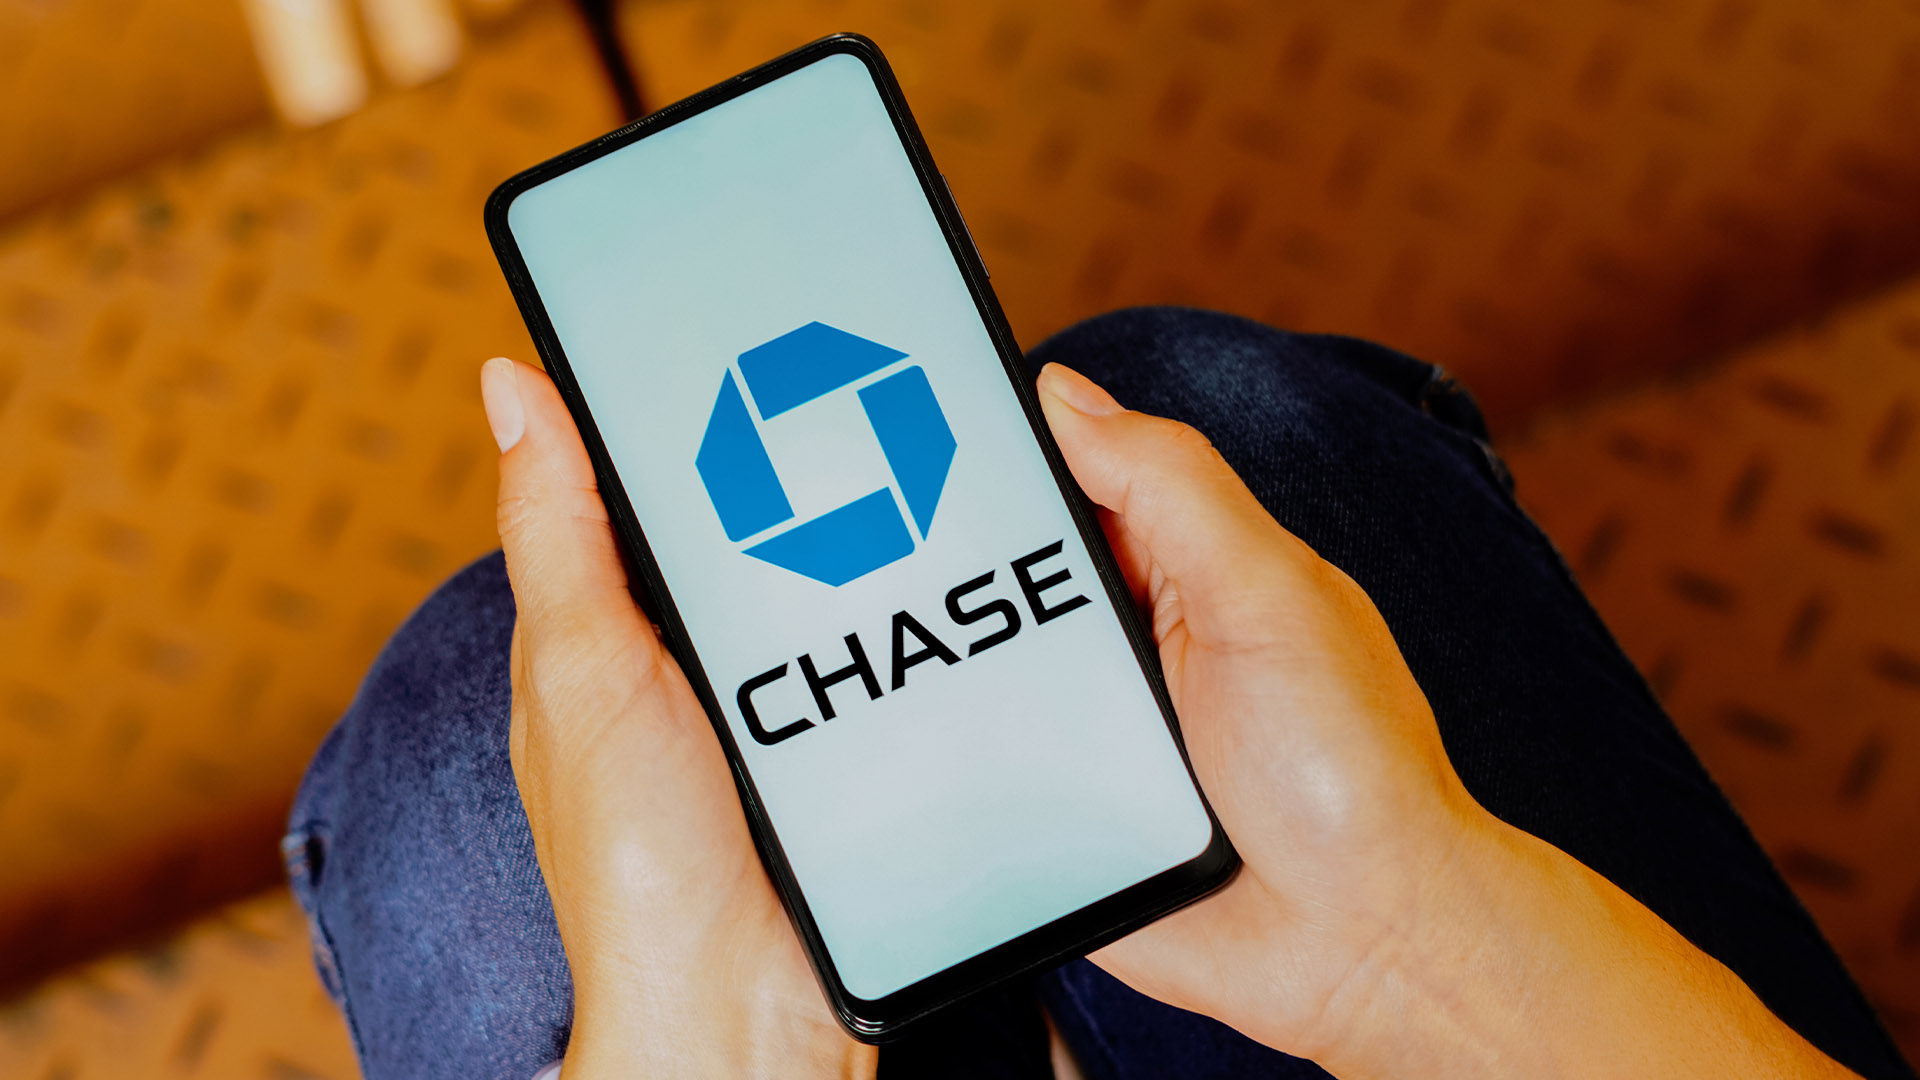 Bank app and website outage: Users frustrated as Chase updates cause login issues